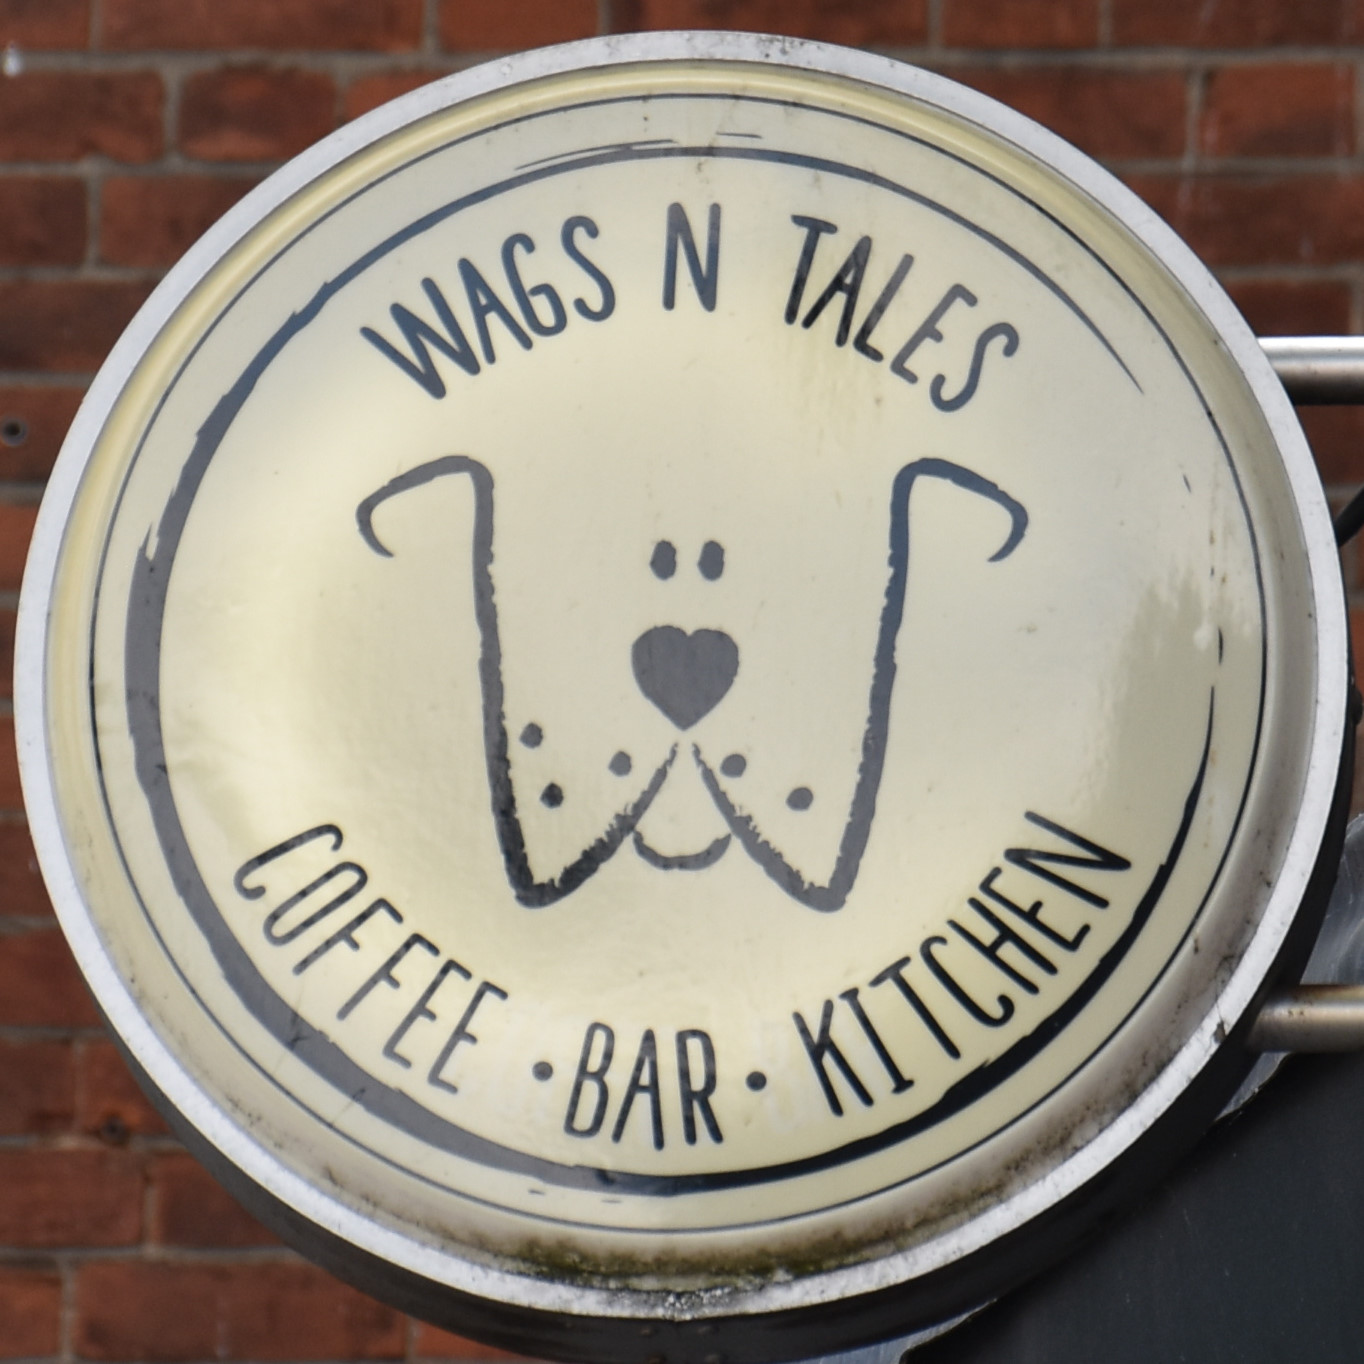 The Wags N Tails logo, a stylised line drawing of a dog's face inside a circle, with the words "Wags N Tales" written at the top of the circle and "Coffee Bar Kitchen" written at the bottom.